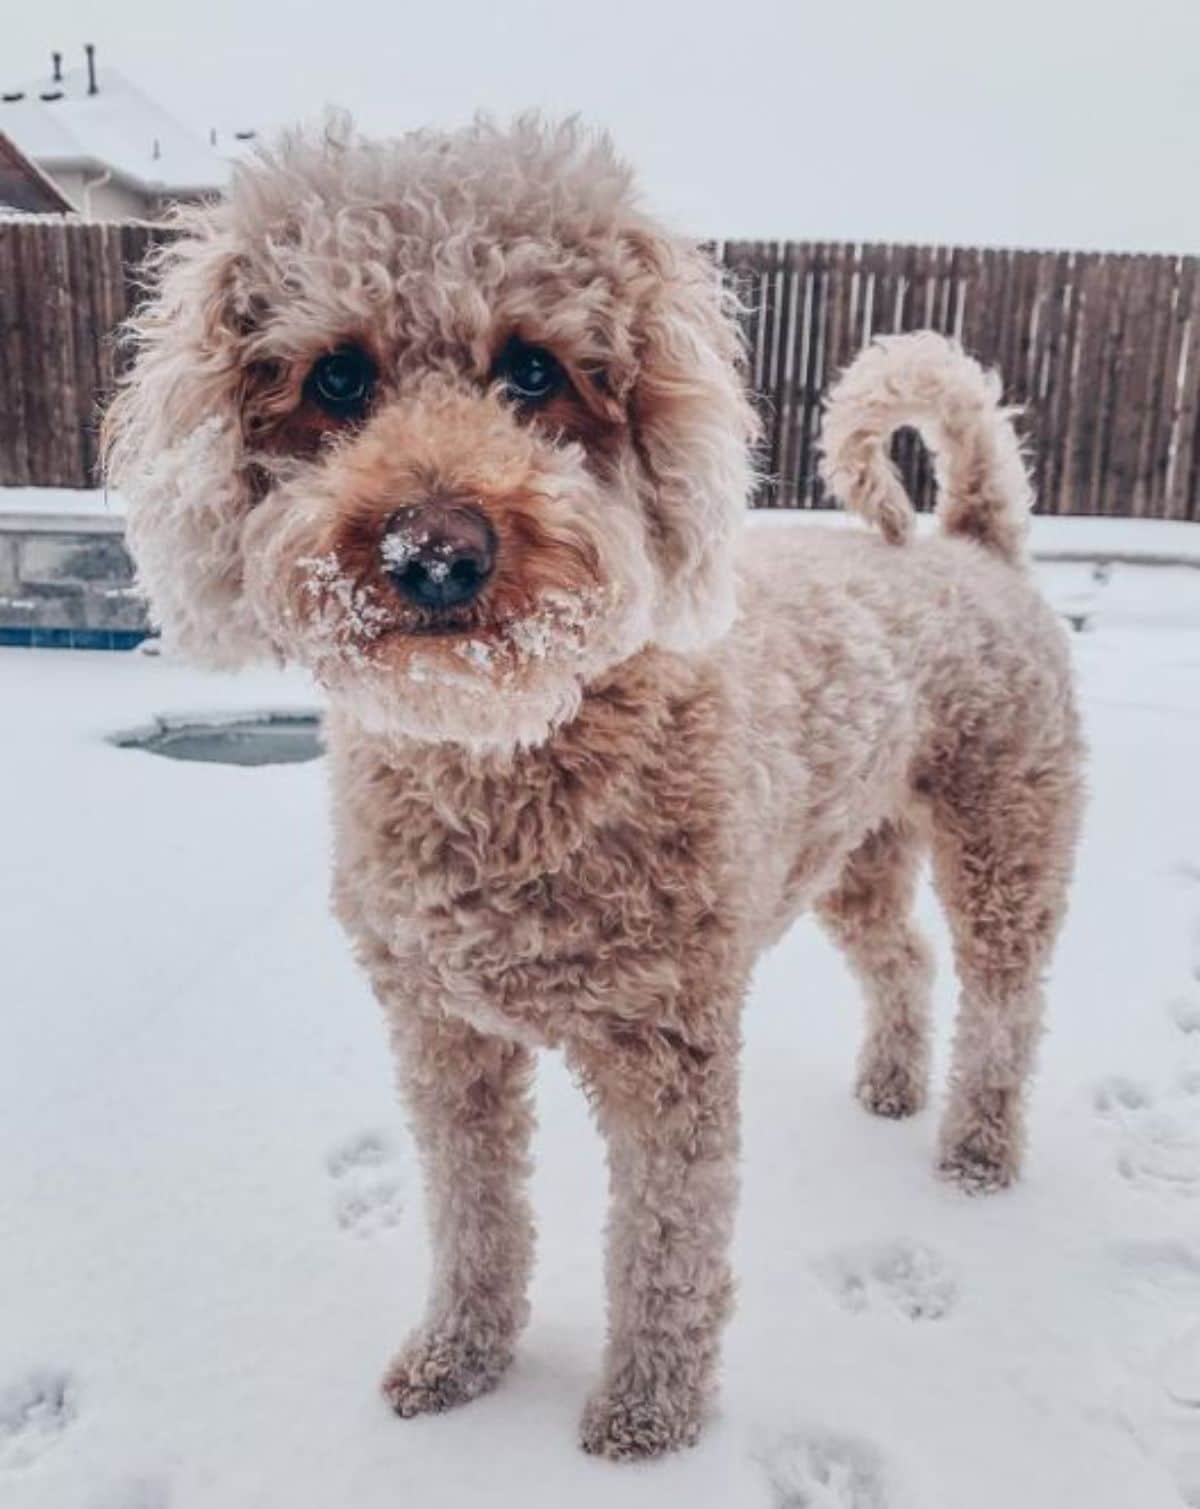 brown poodle with a snow beard standing in snow